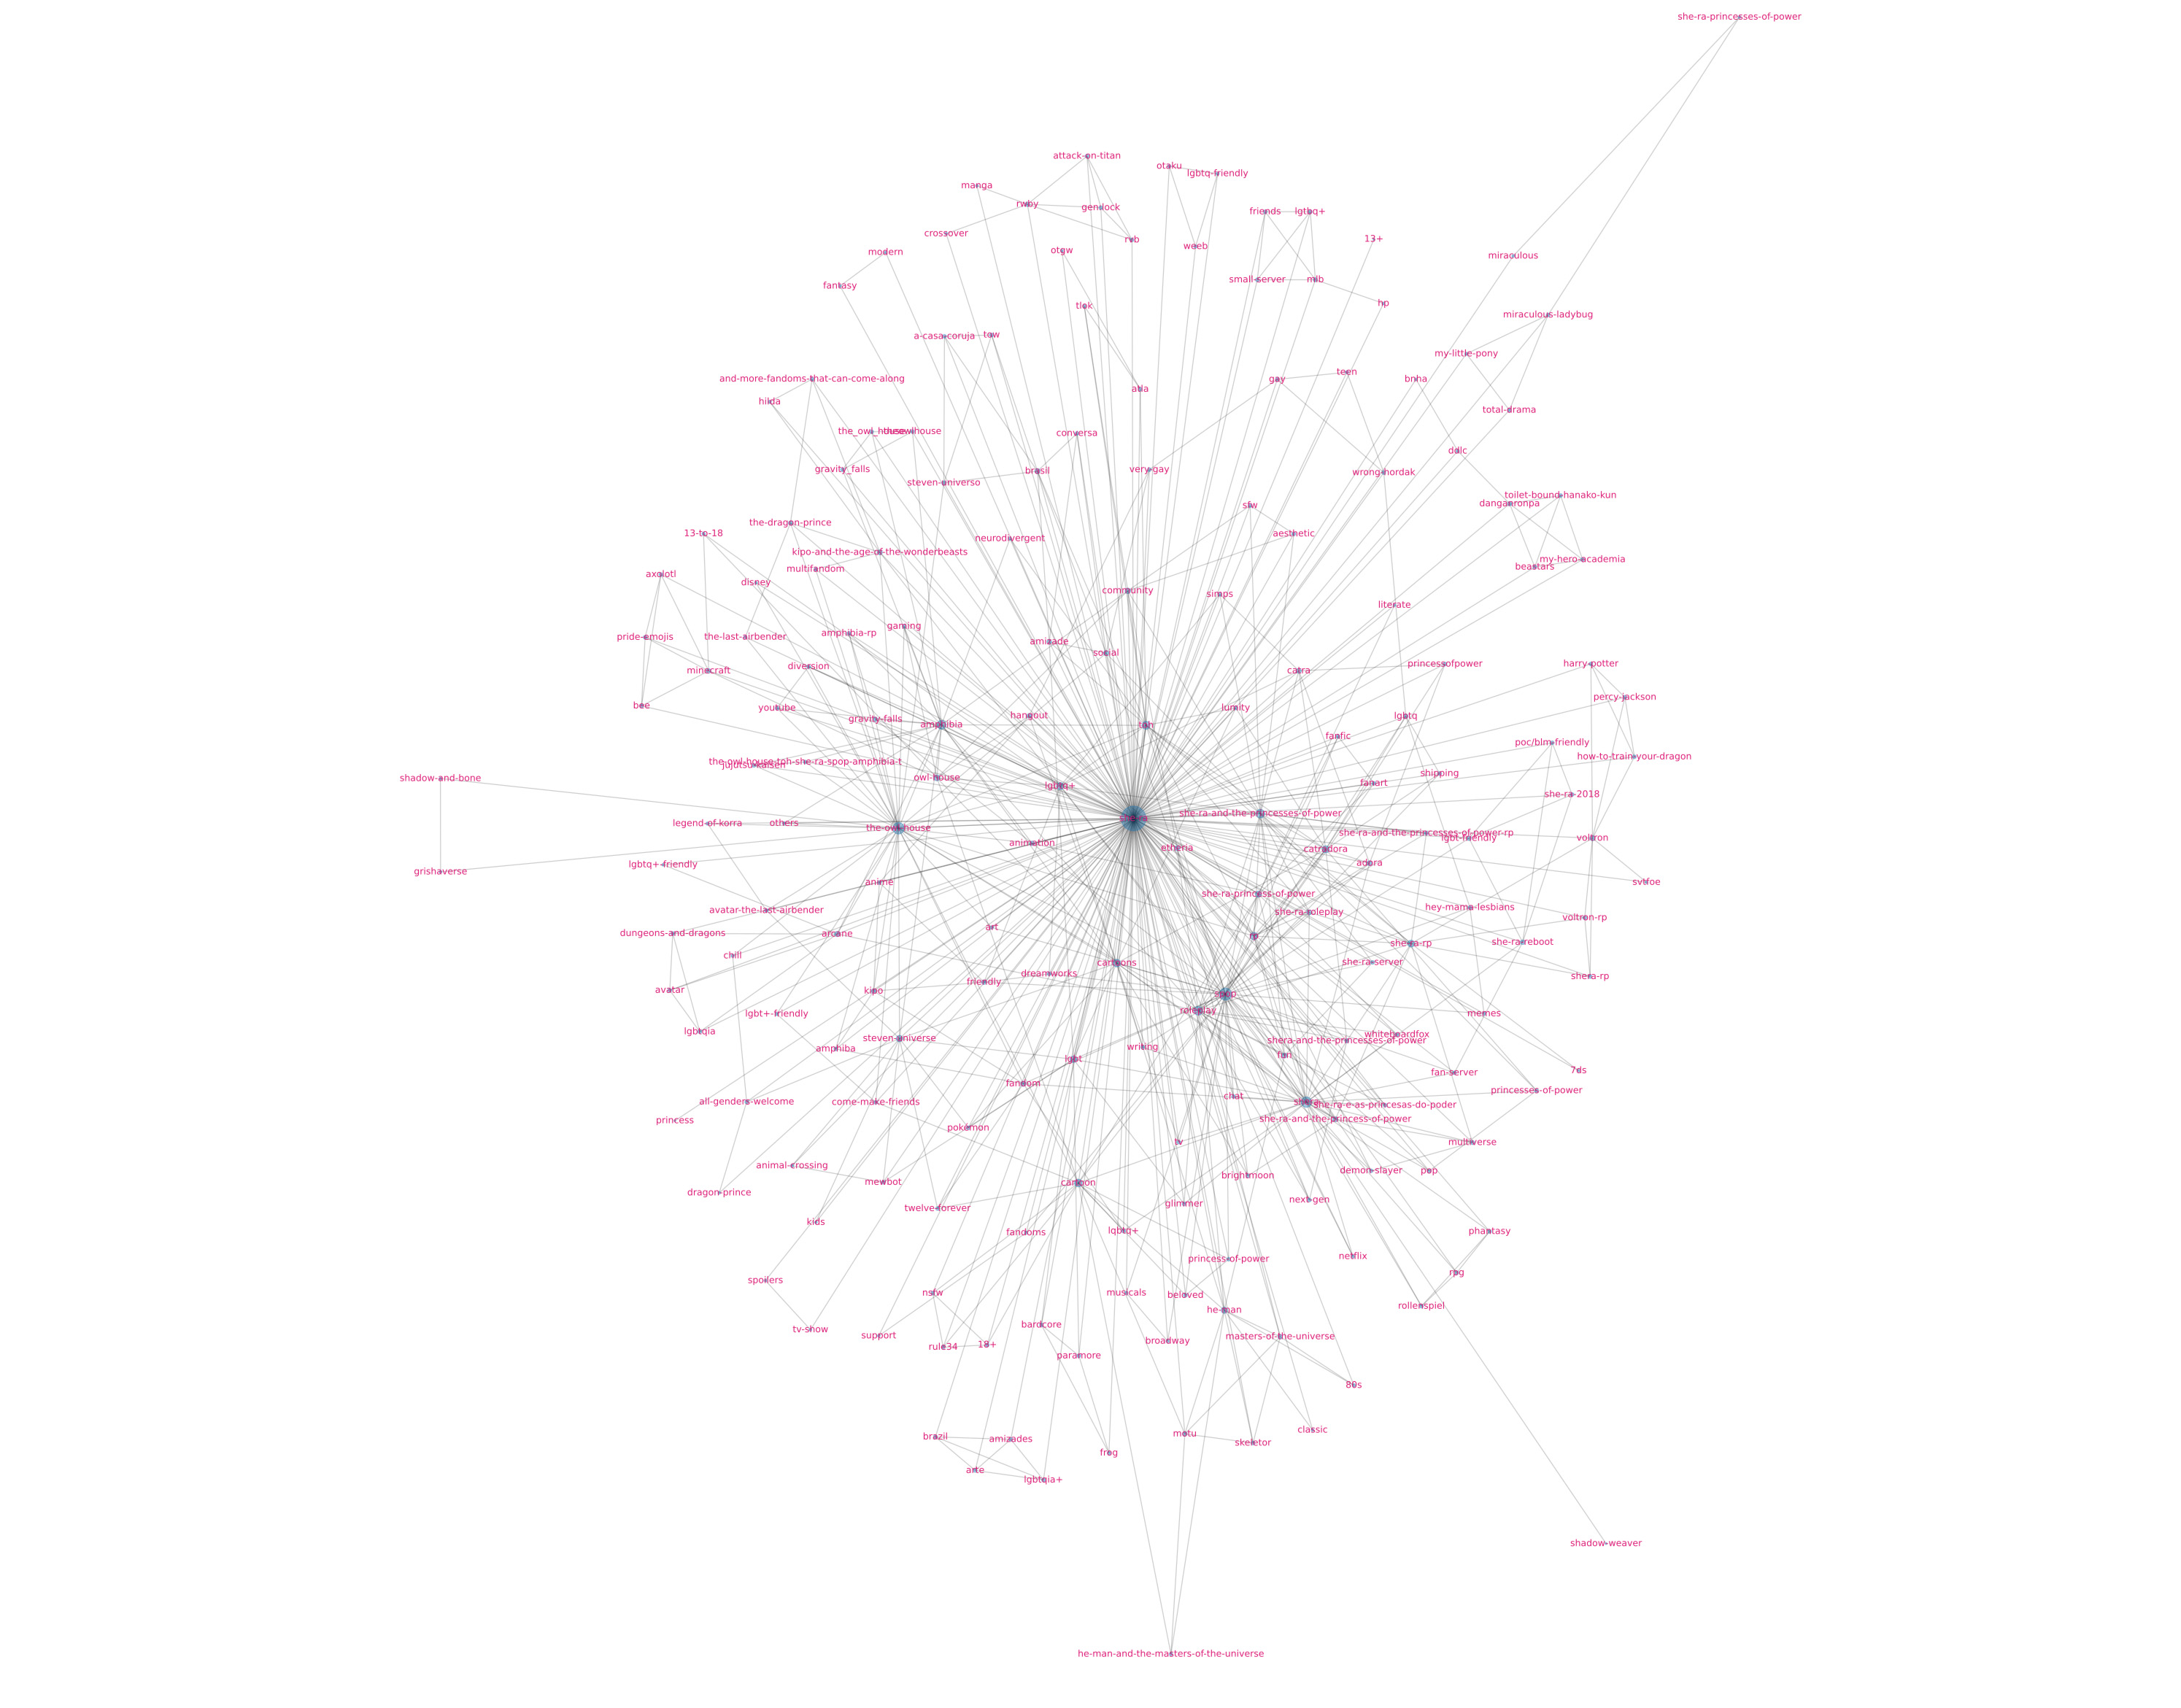 A visual mapping of server tags. There is a scattering of nodes labeled with various subparts of the fandom.